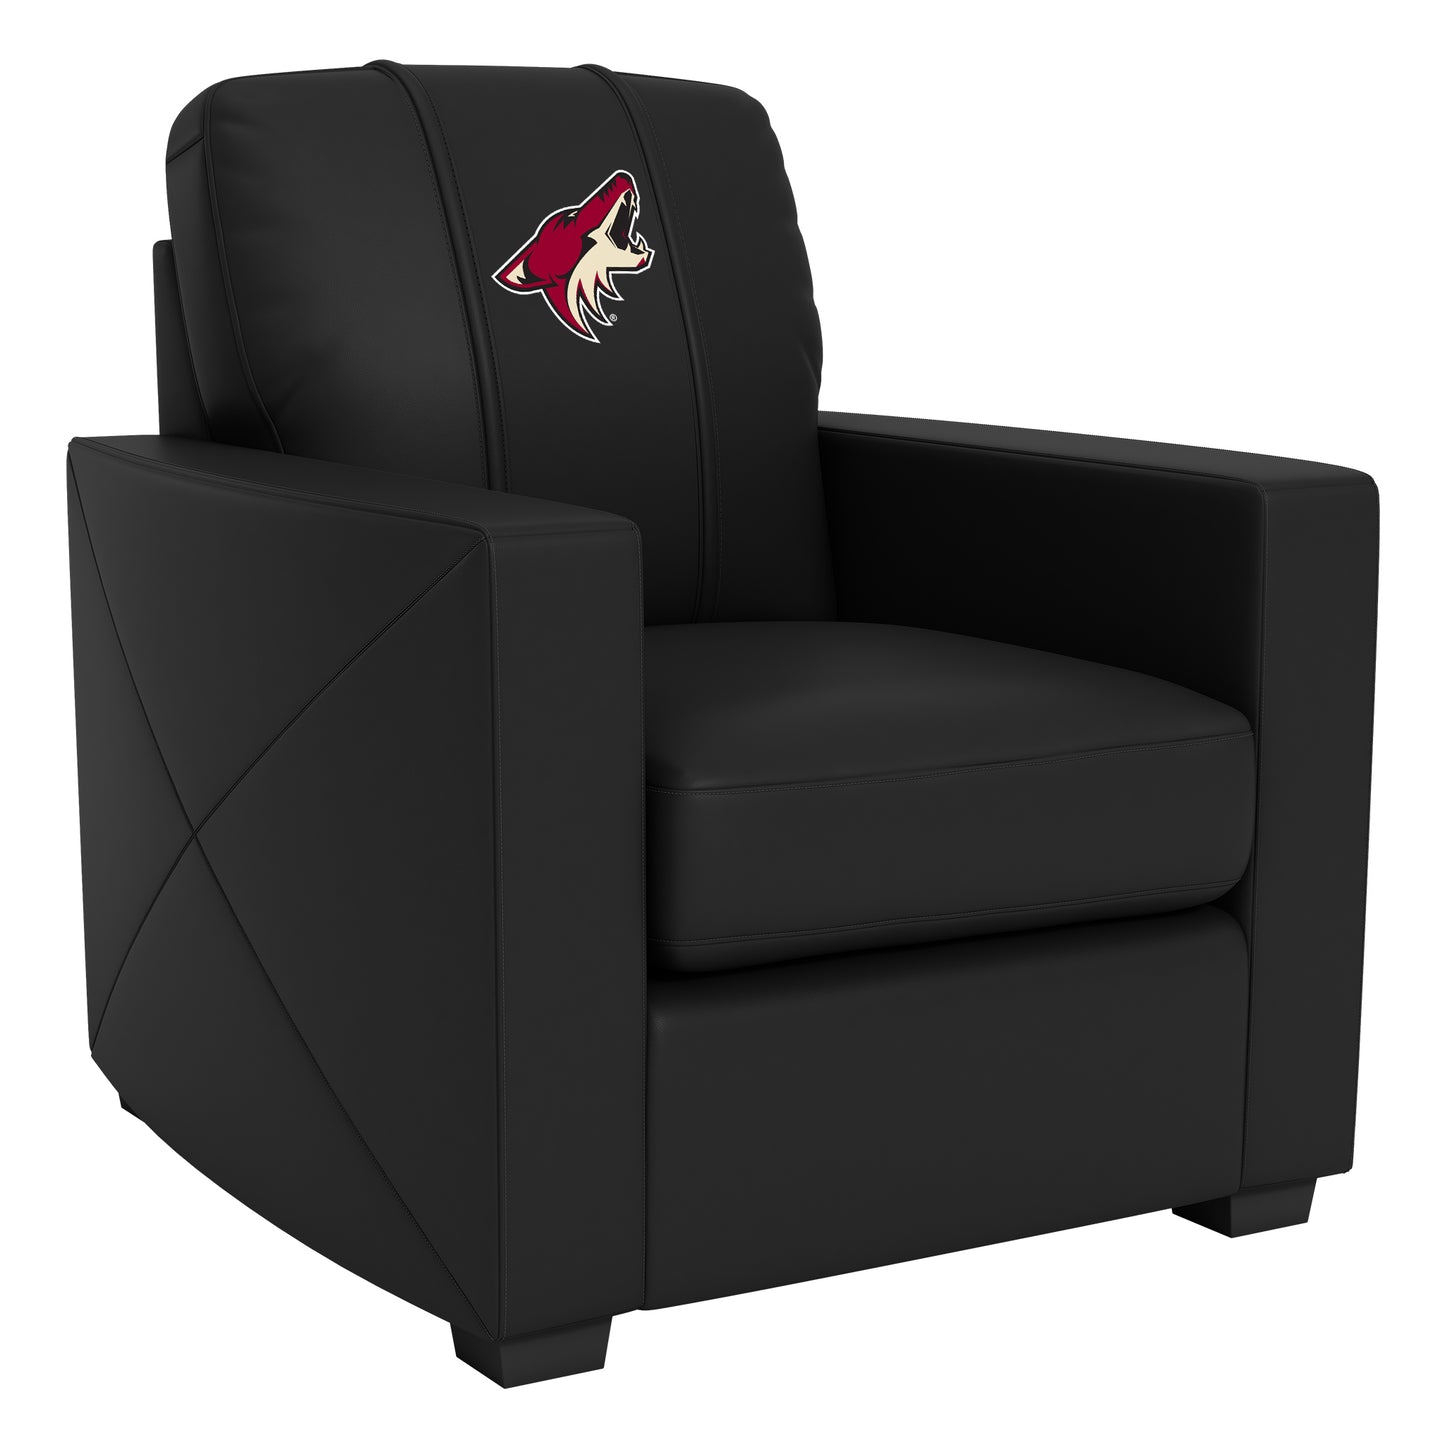 Silver Club Chair with Arizona Coyotes Third Jersey Logo